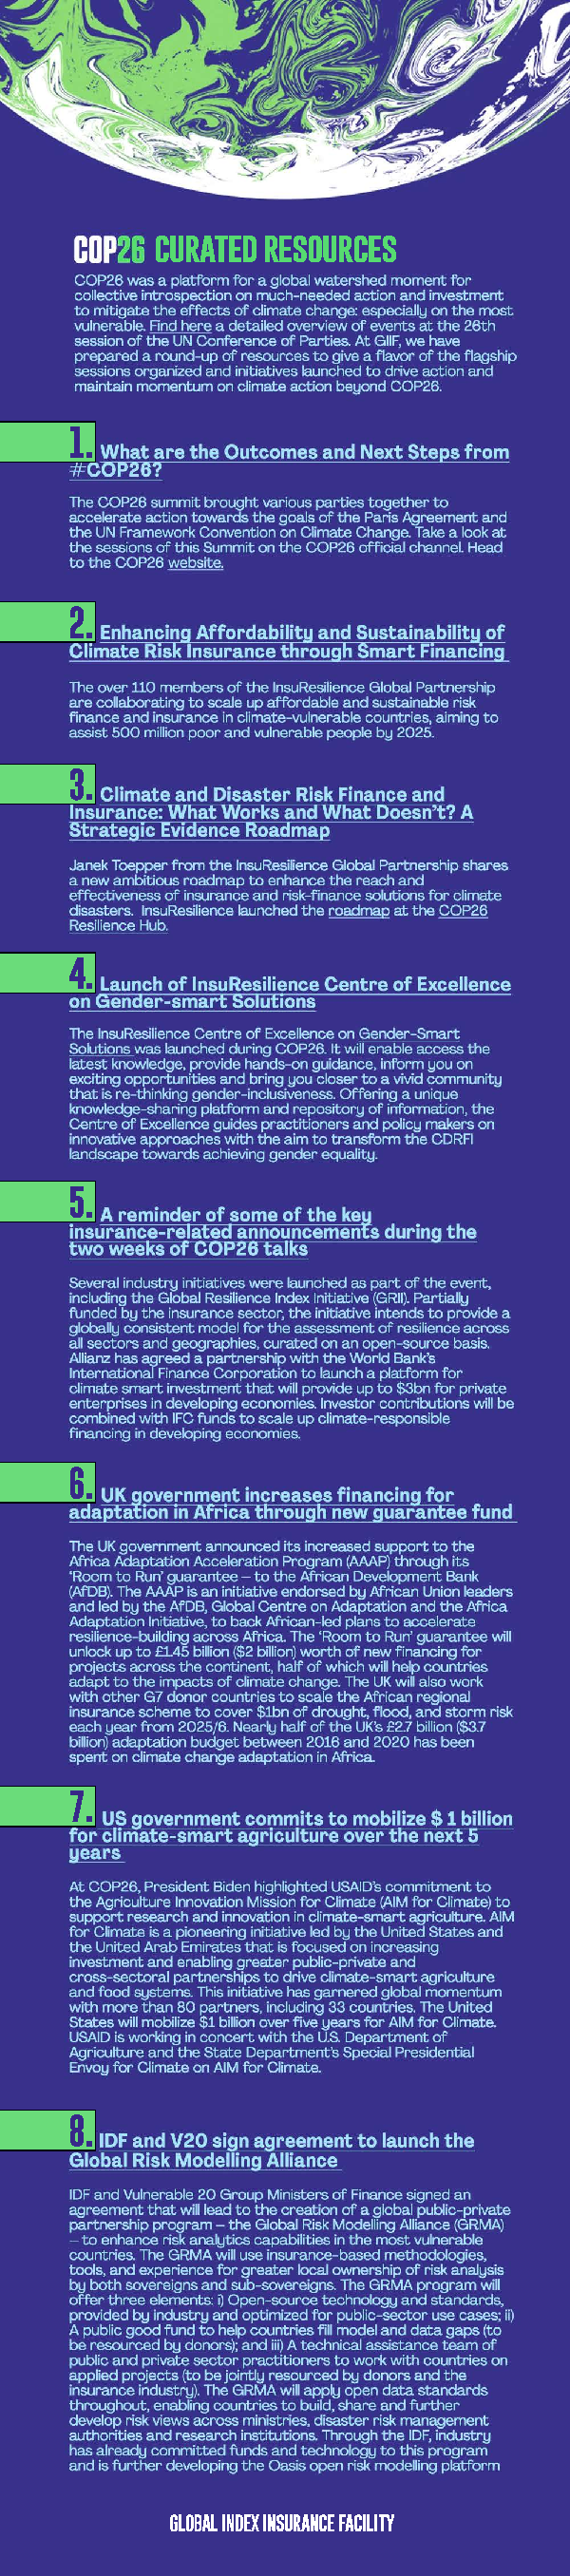 COP26 Curated Resources: One-Pager